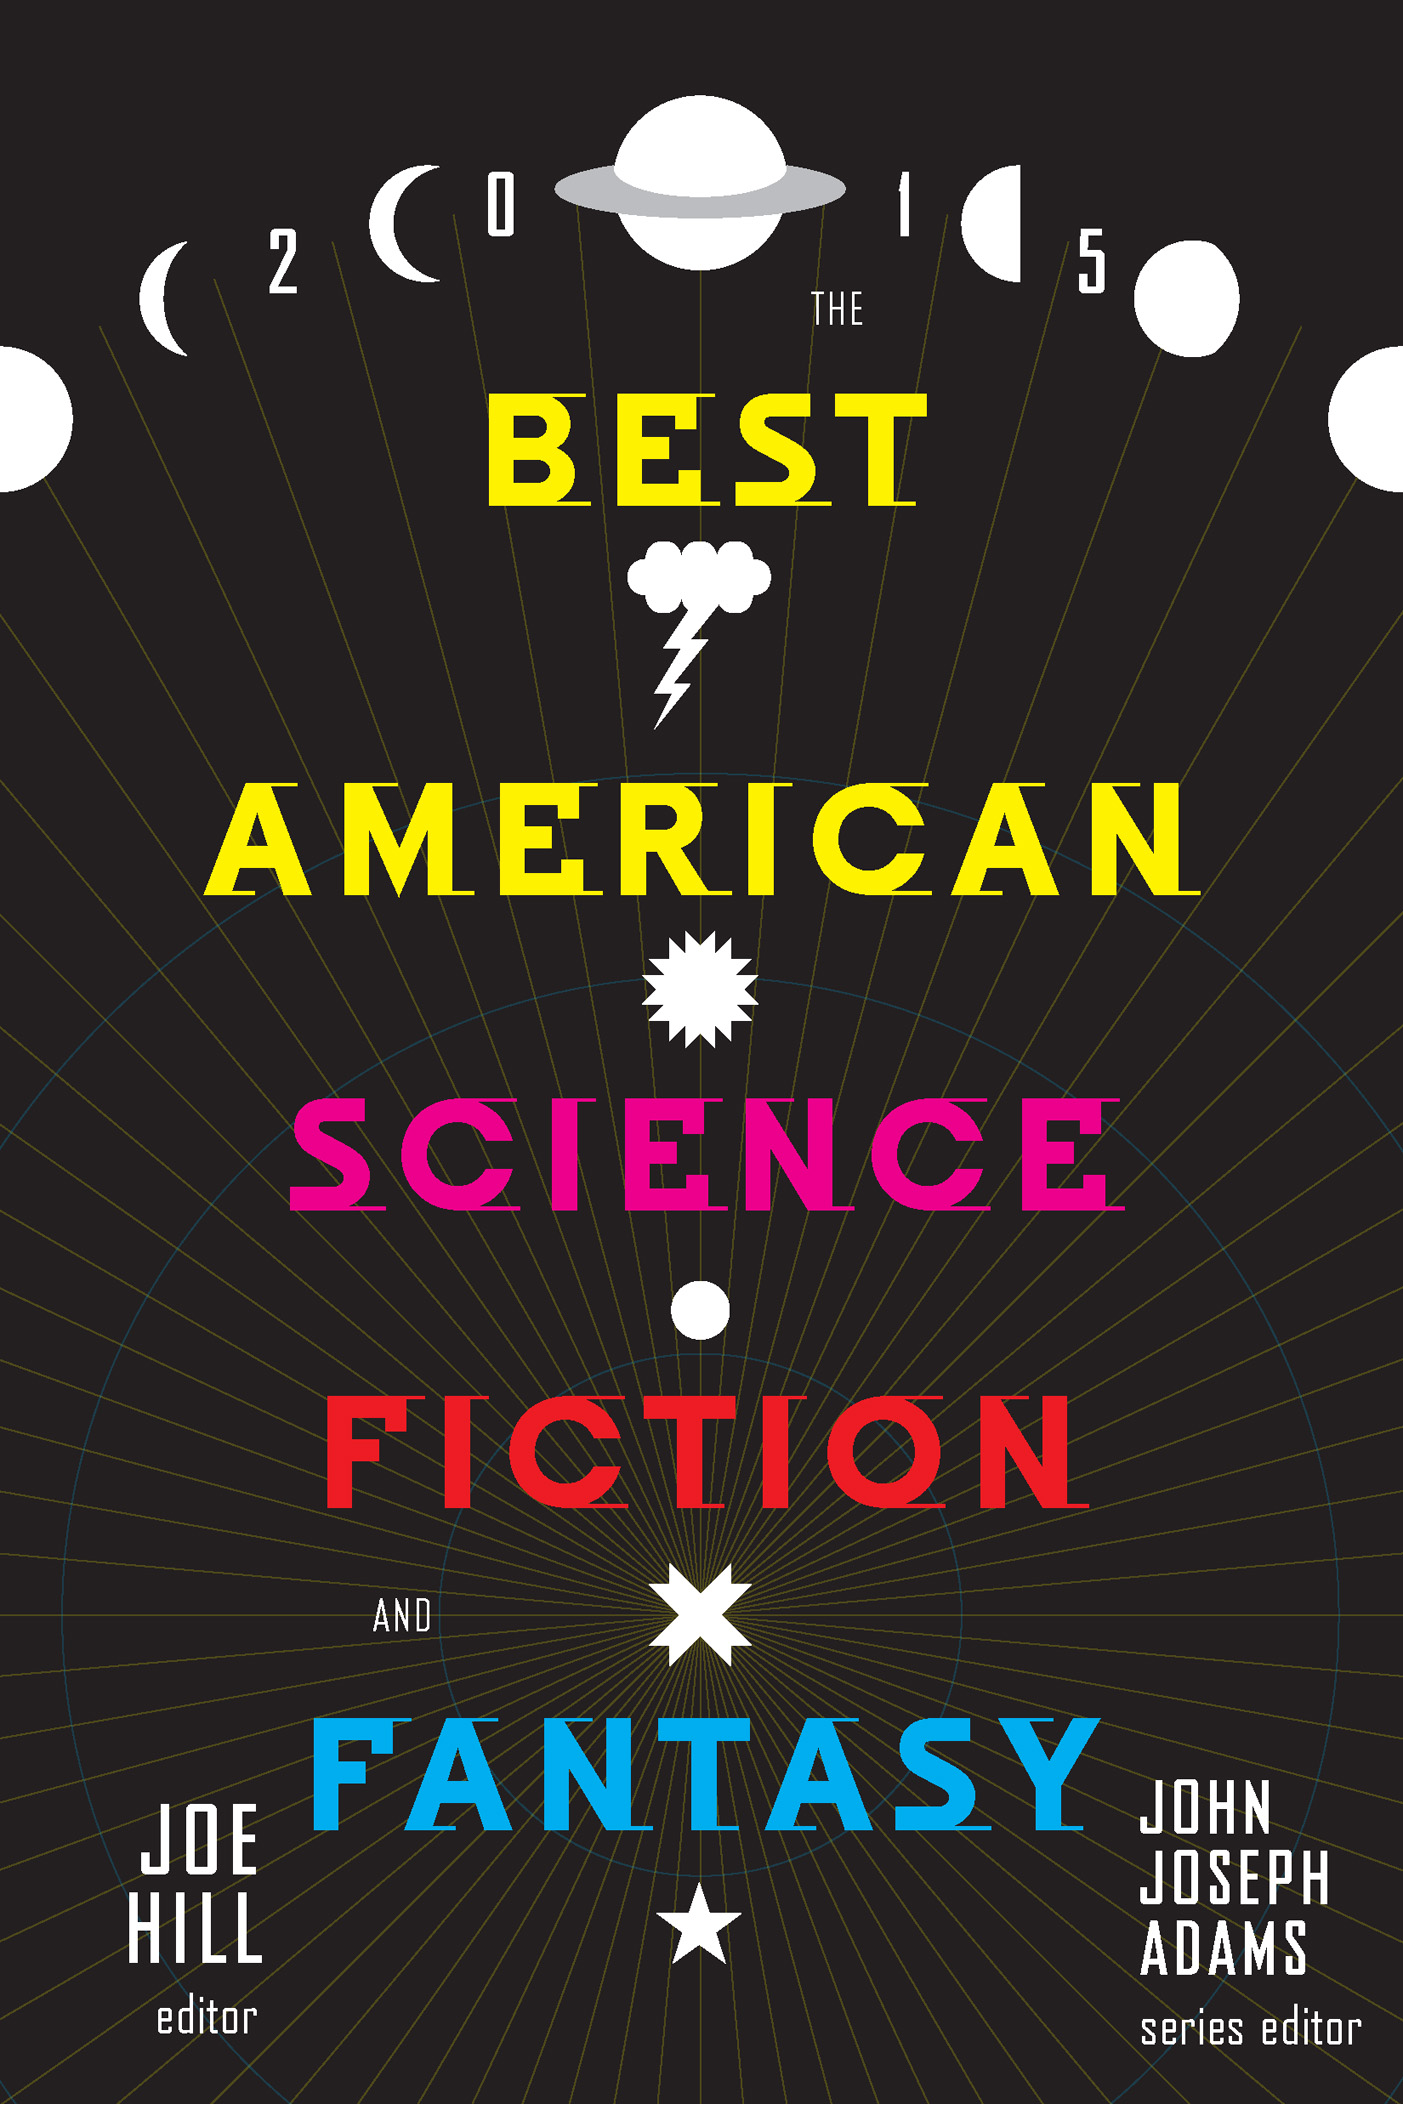 The Best American Science Fiction and Fantasy 2015 by Joe Hill